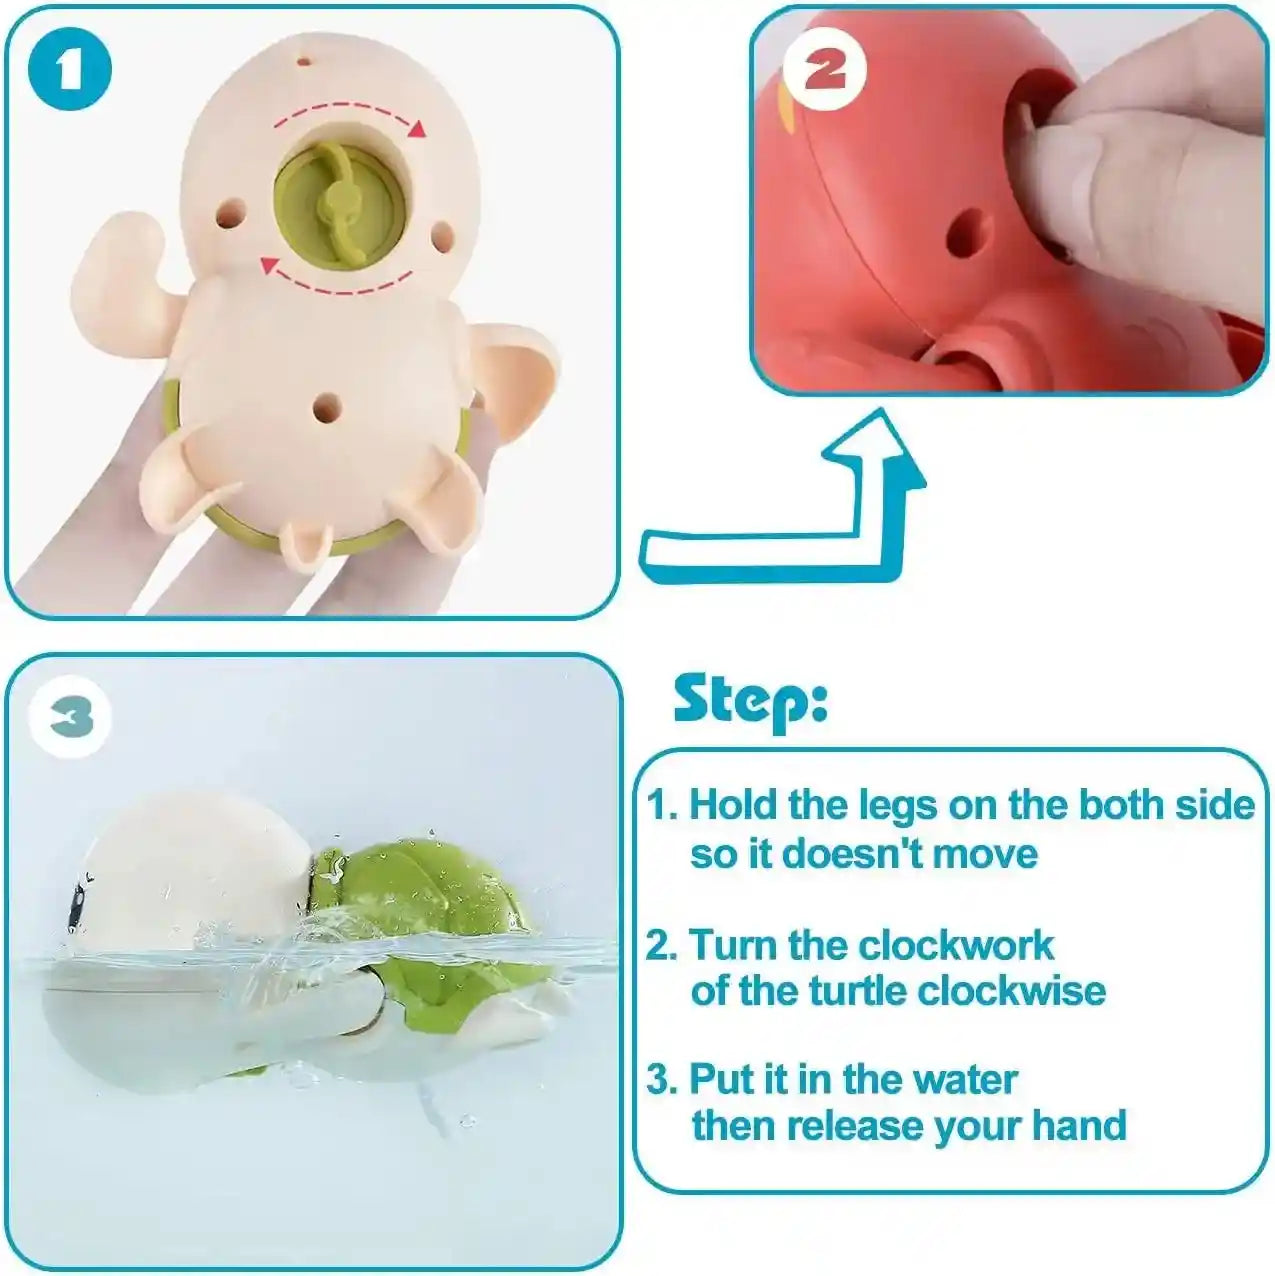 Wind-up Turtles for Bathtime Adventures! - For all baby